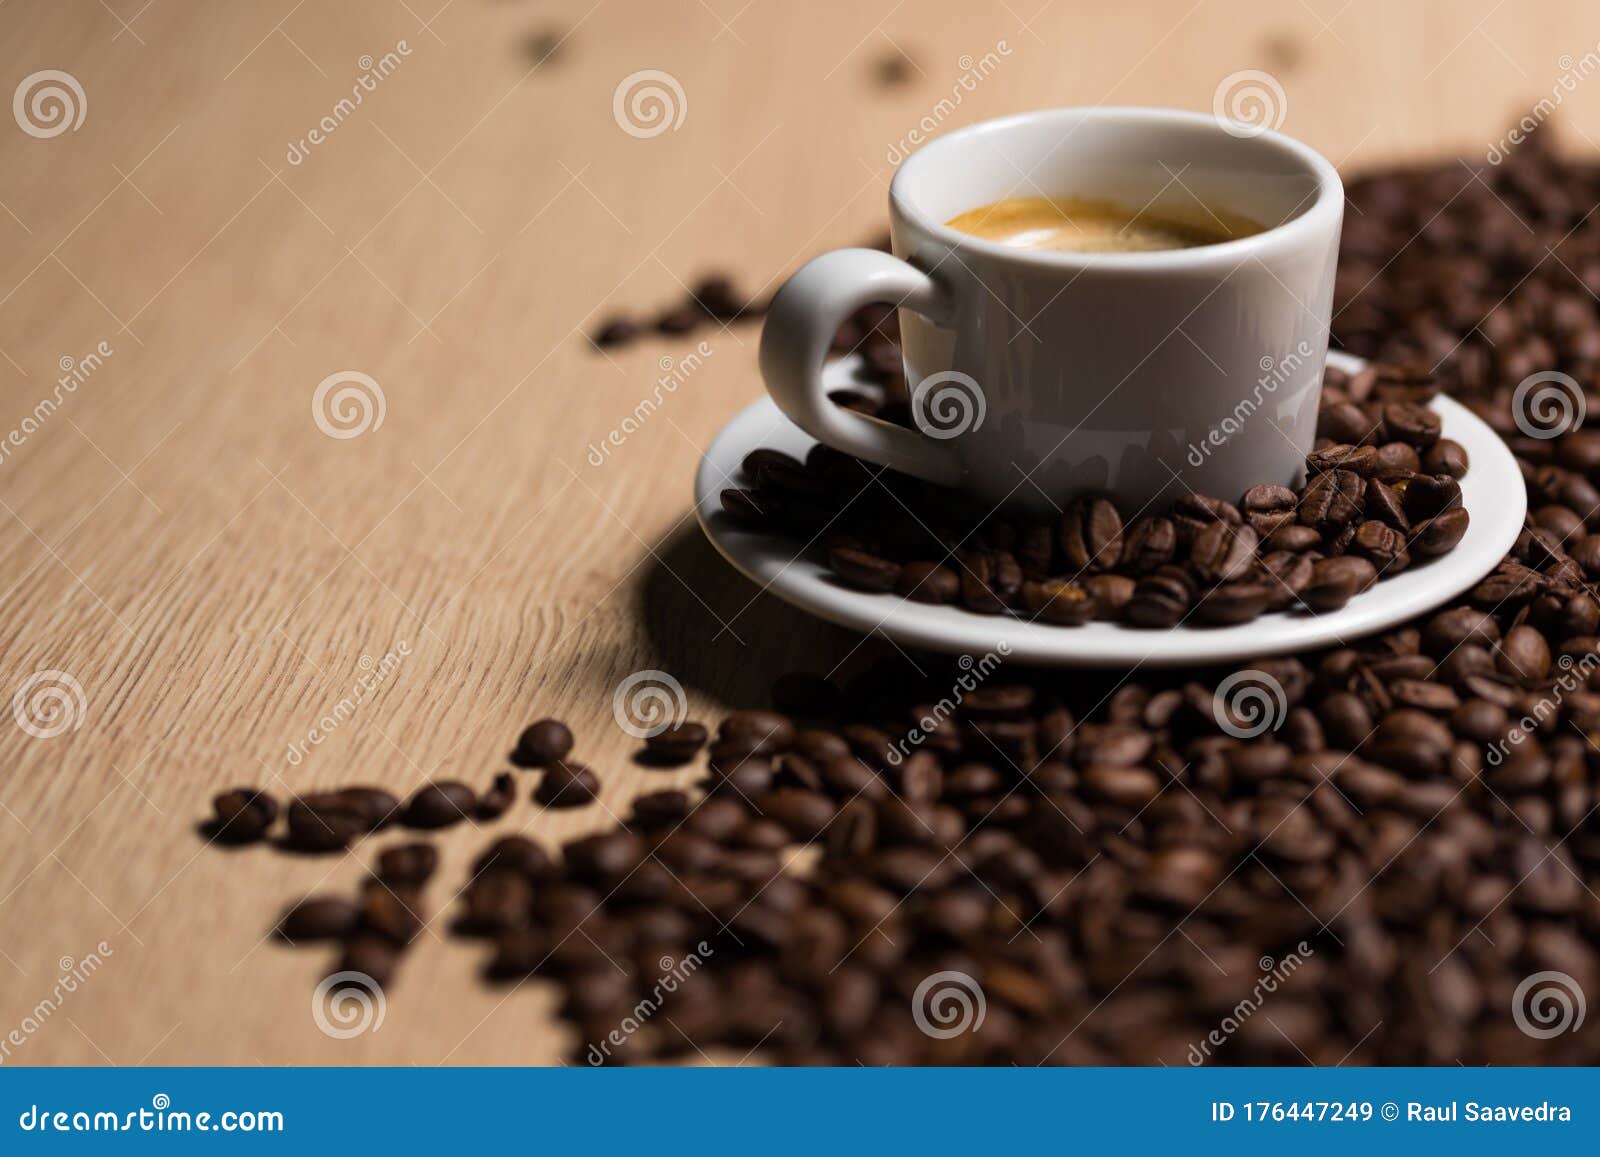 cup of coffee on a wooden table with natural coffee